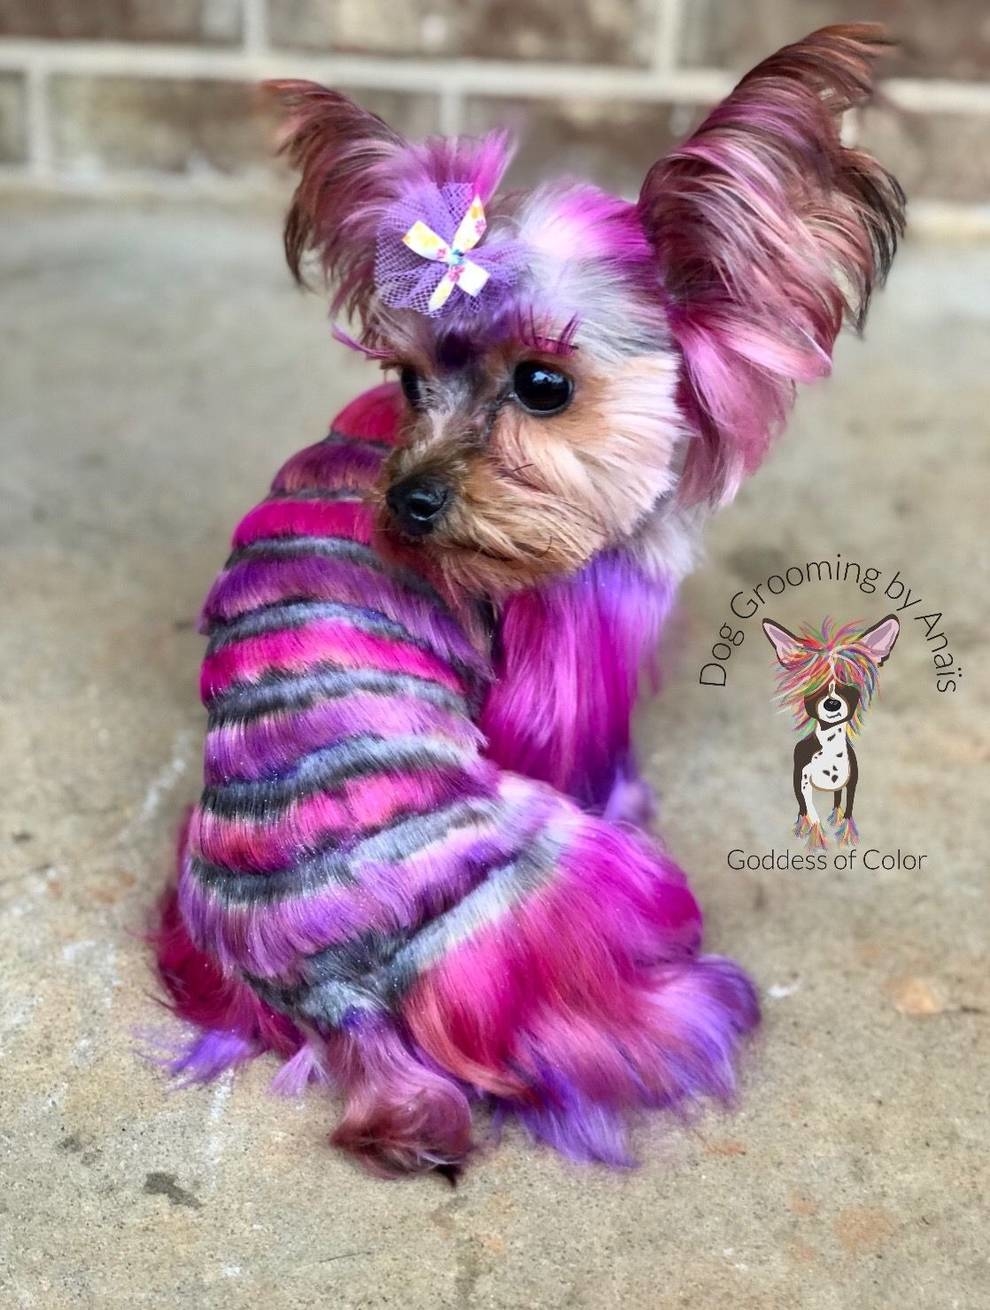 Atlanta hairdresser invents new looks for pets